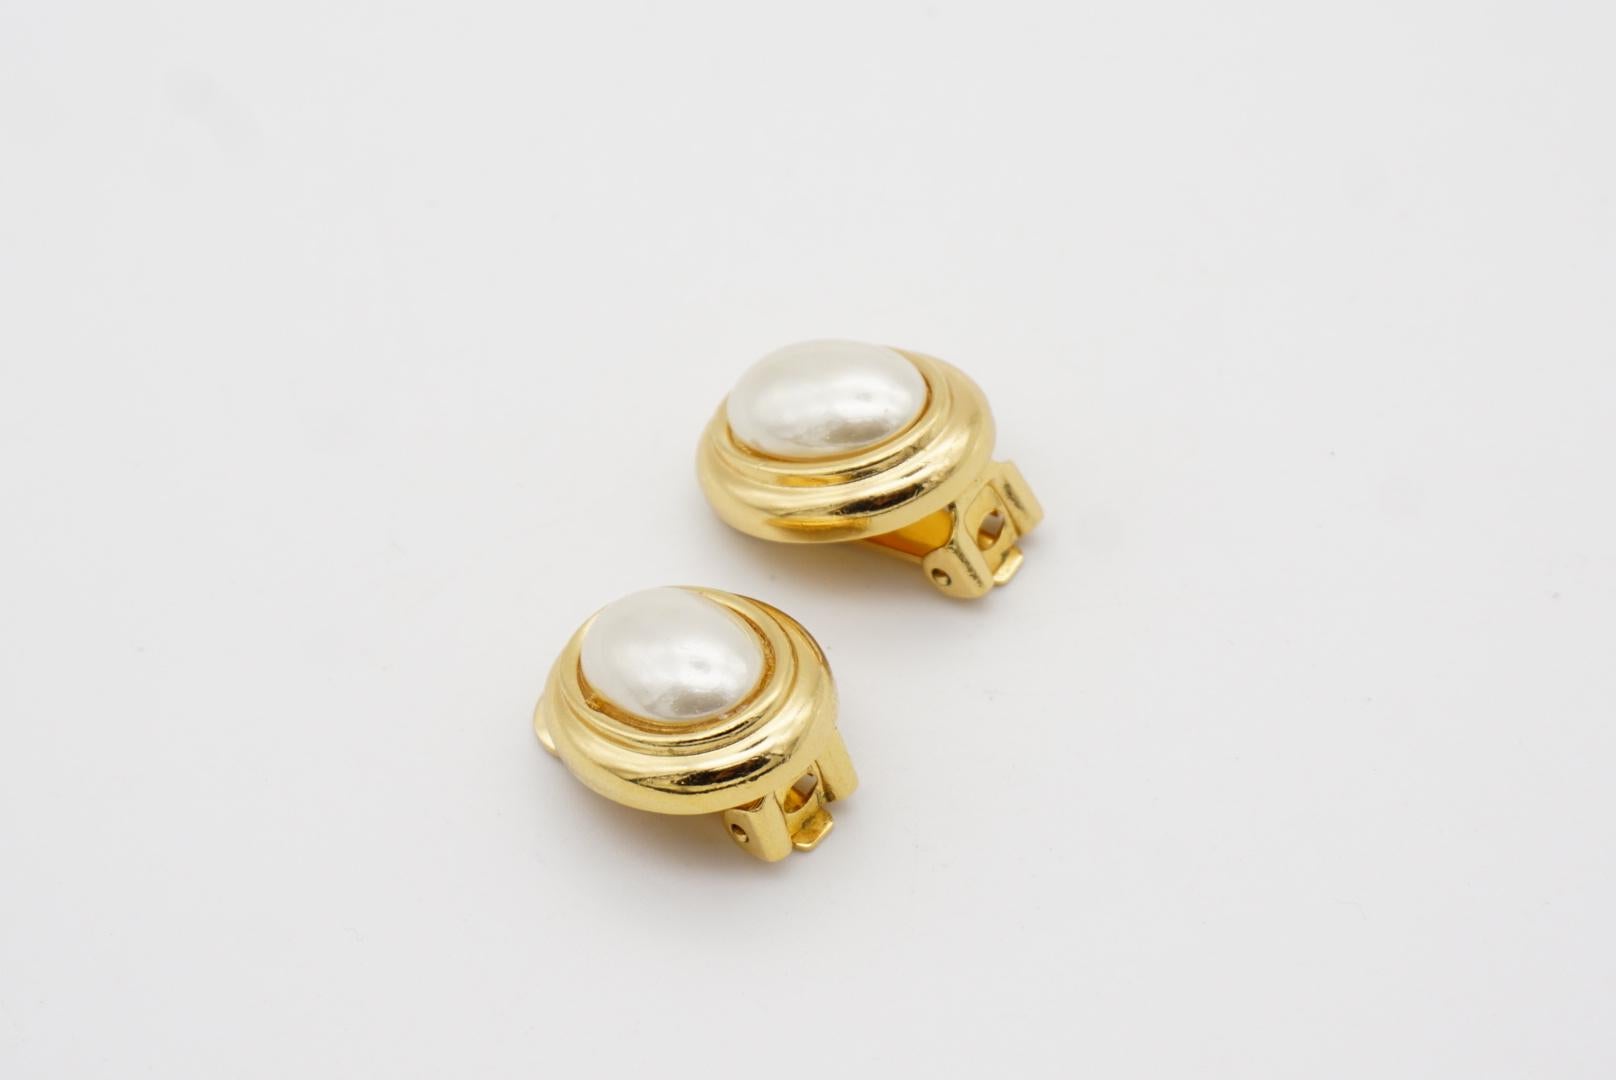 Christian Dior Vintage 1980s Large White Oval Pearl Elegant Gold Clip Earrings For Sale 4